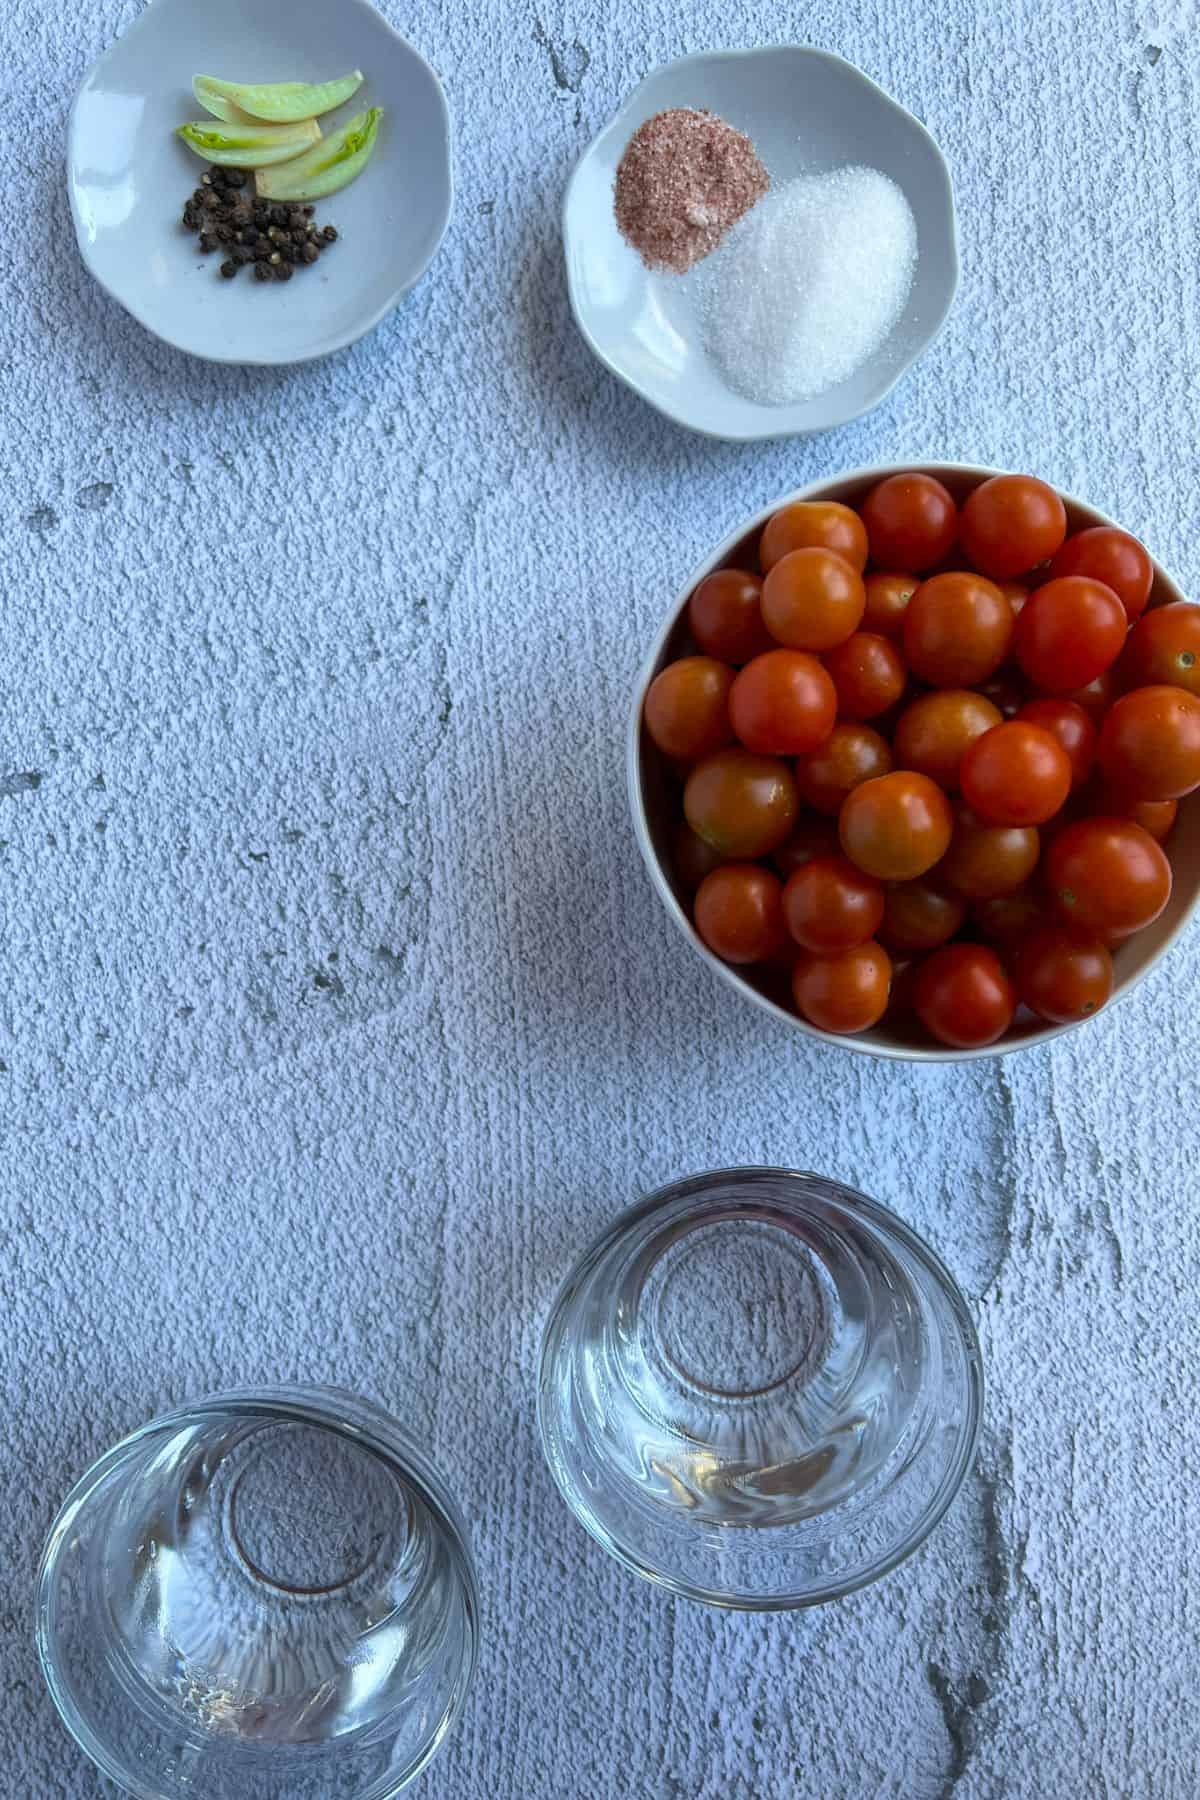 Ingredients lists for pickled tomatoes on the table.